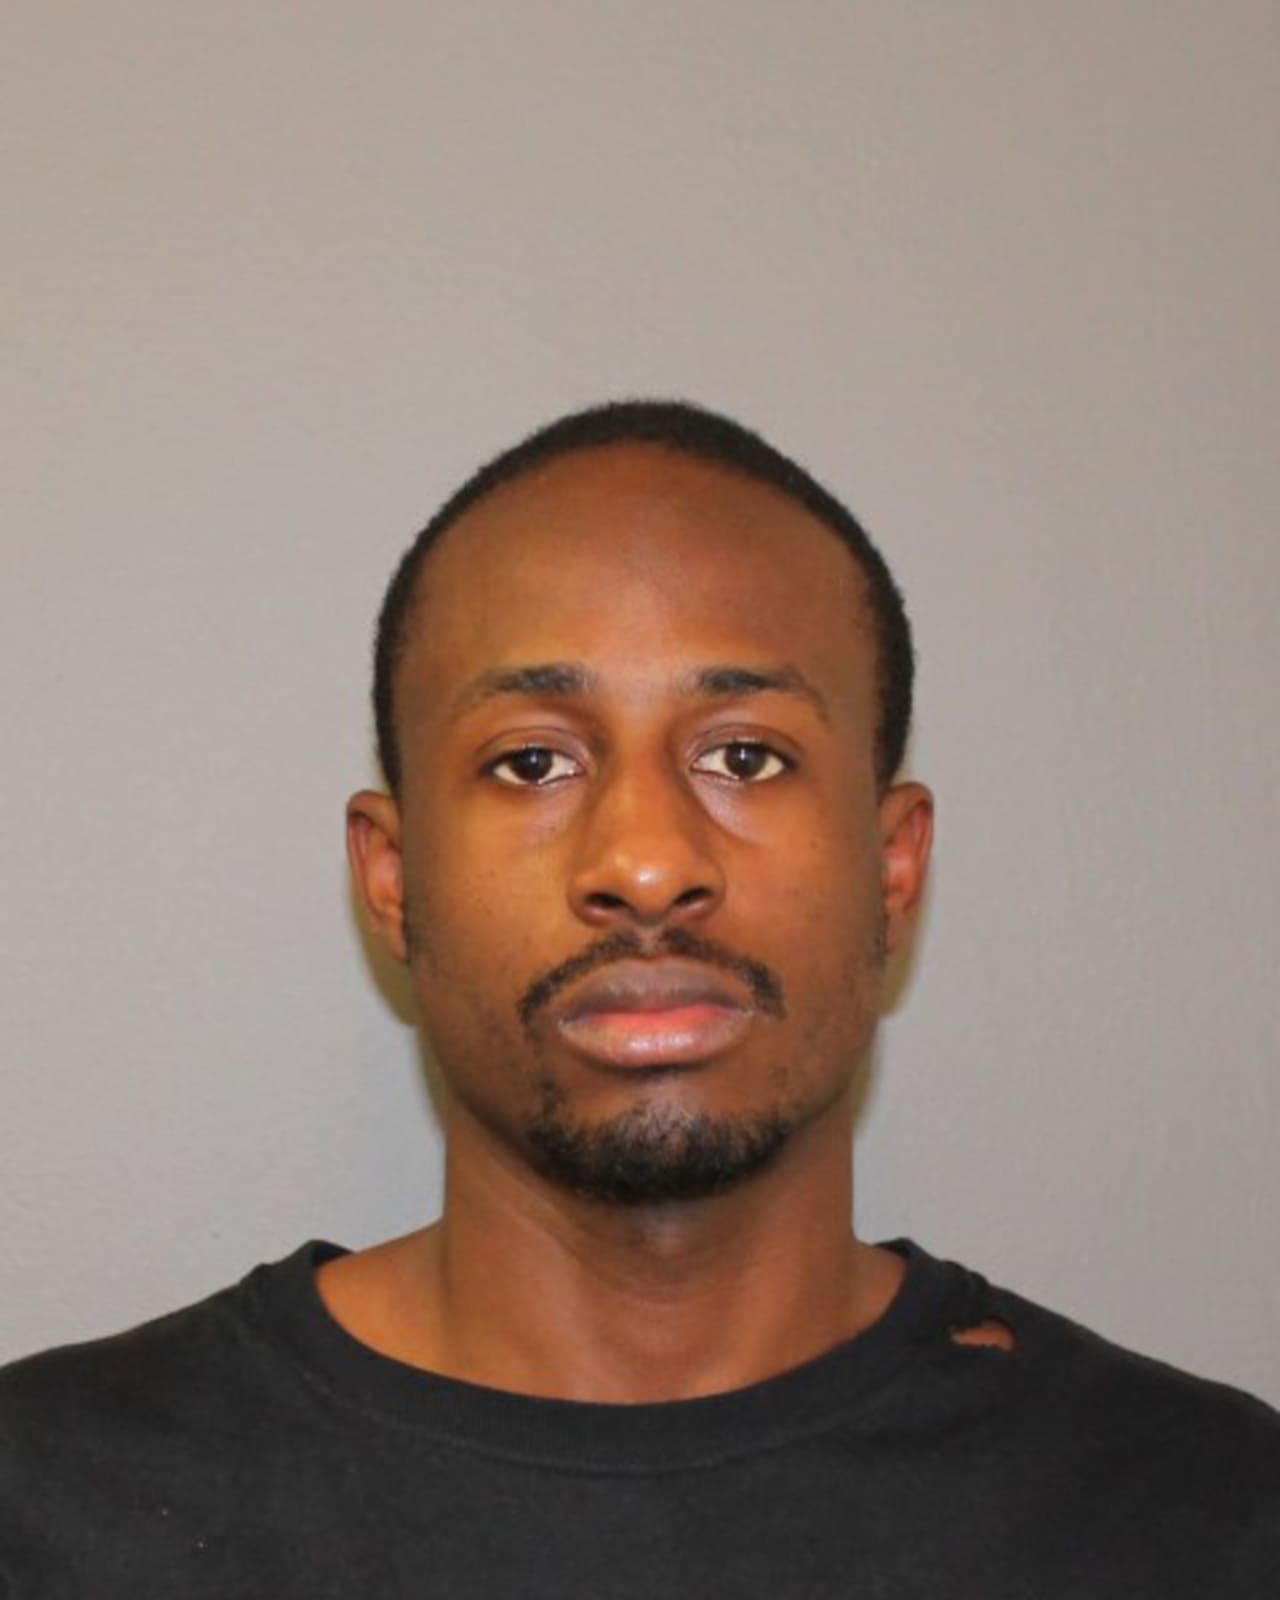 Chadwick Adams, 28, of Pleasantville, N.J., was charged first-degree assault, carrying a dangerous weapon, first-degree reckless endangerment, second-degree breach of peace and fourth-degree criminal mischief.